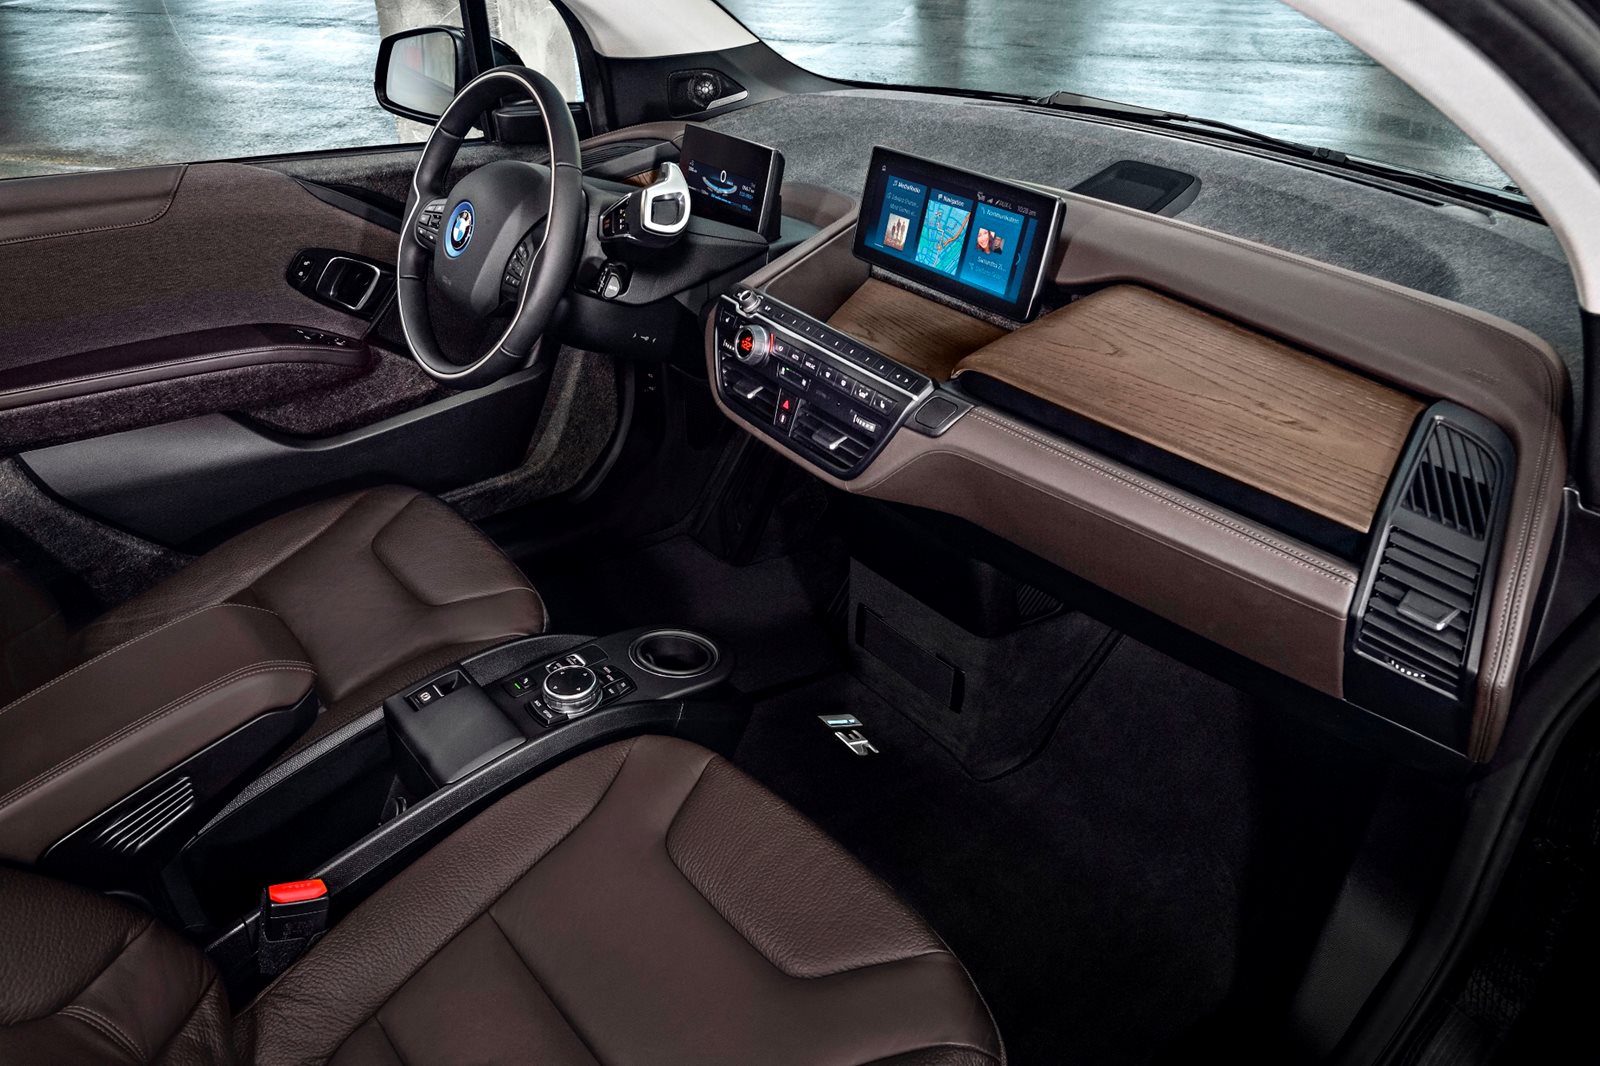 2021 BMW i3 Interior Dimensions: Seating, Cargo Space & Trunk Size - Photos